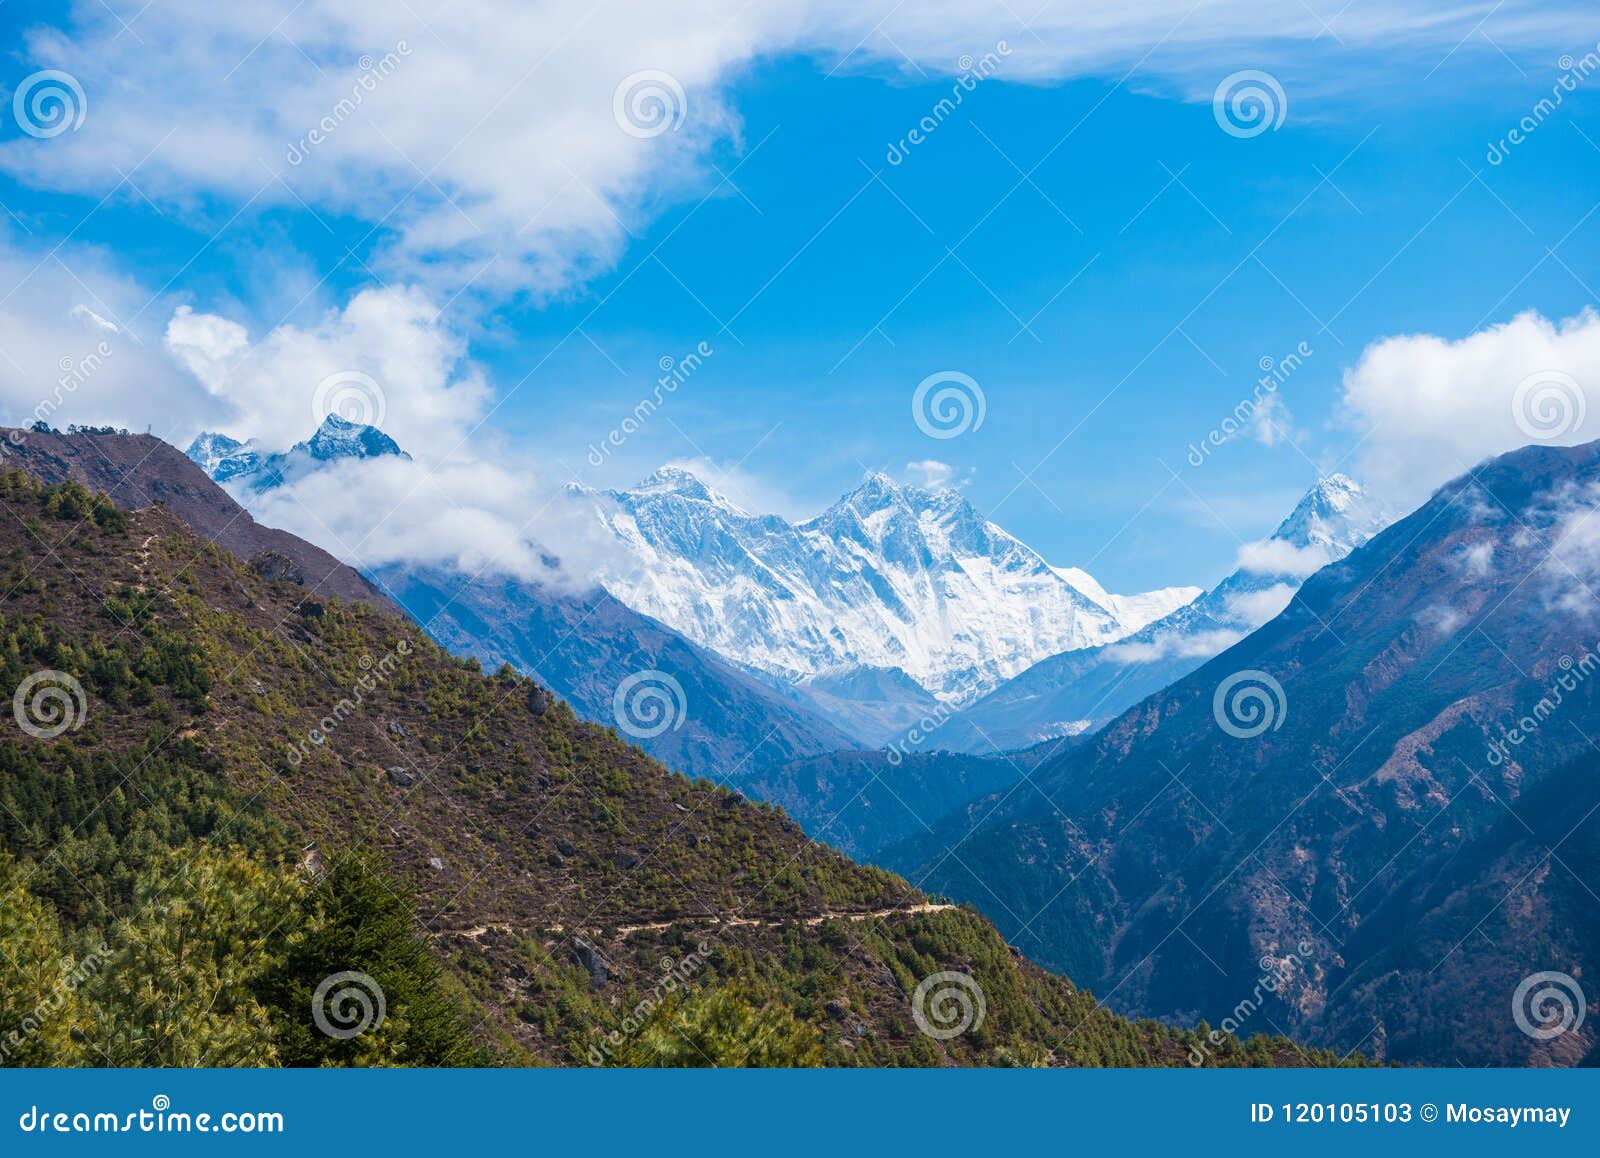 beautiful snow defile mountain landscape, trekking route to the